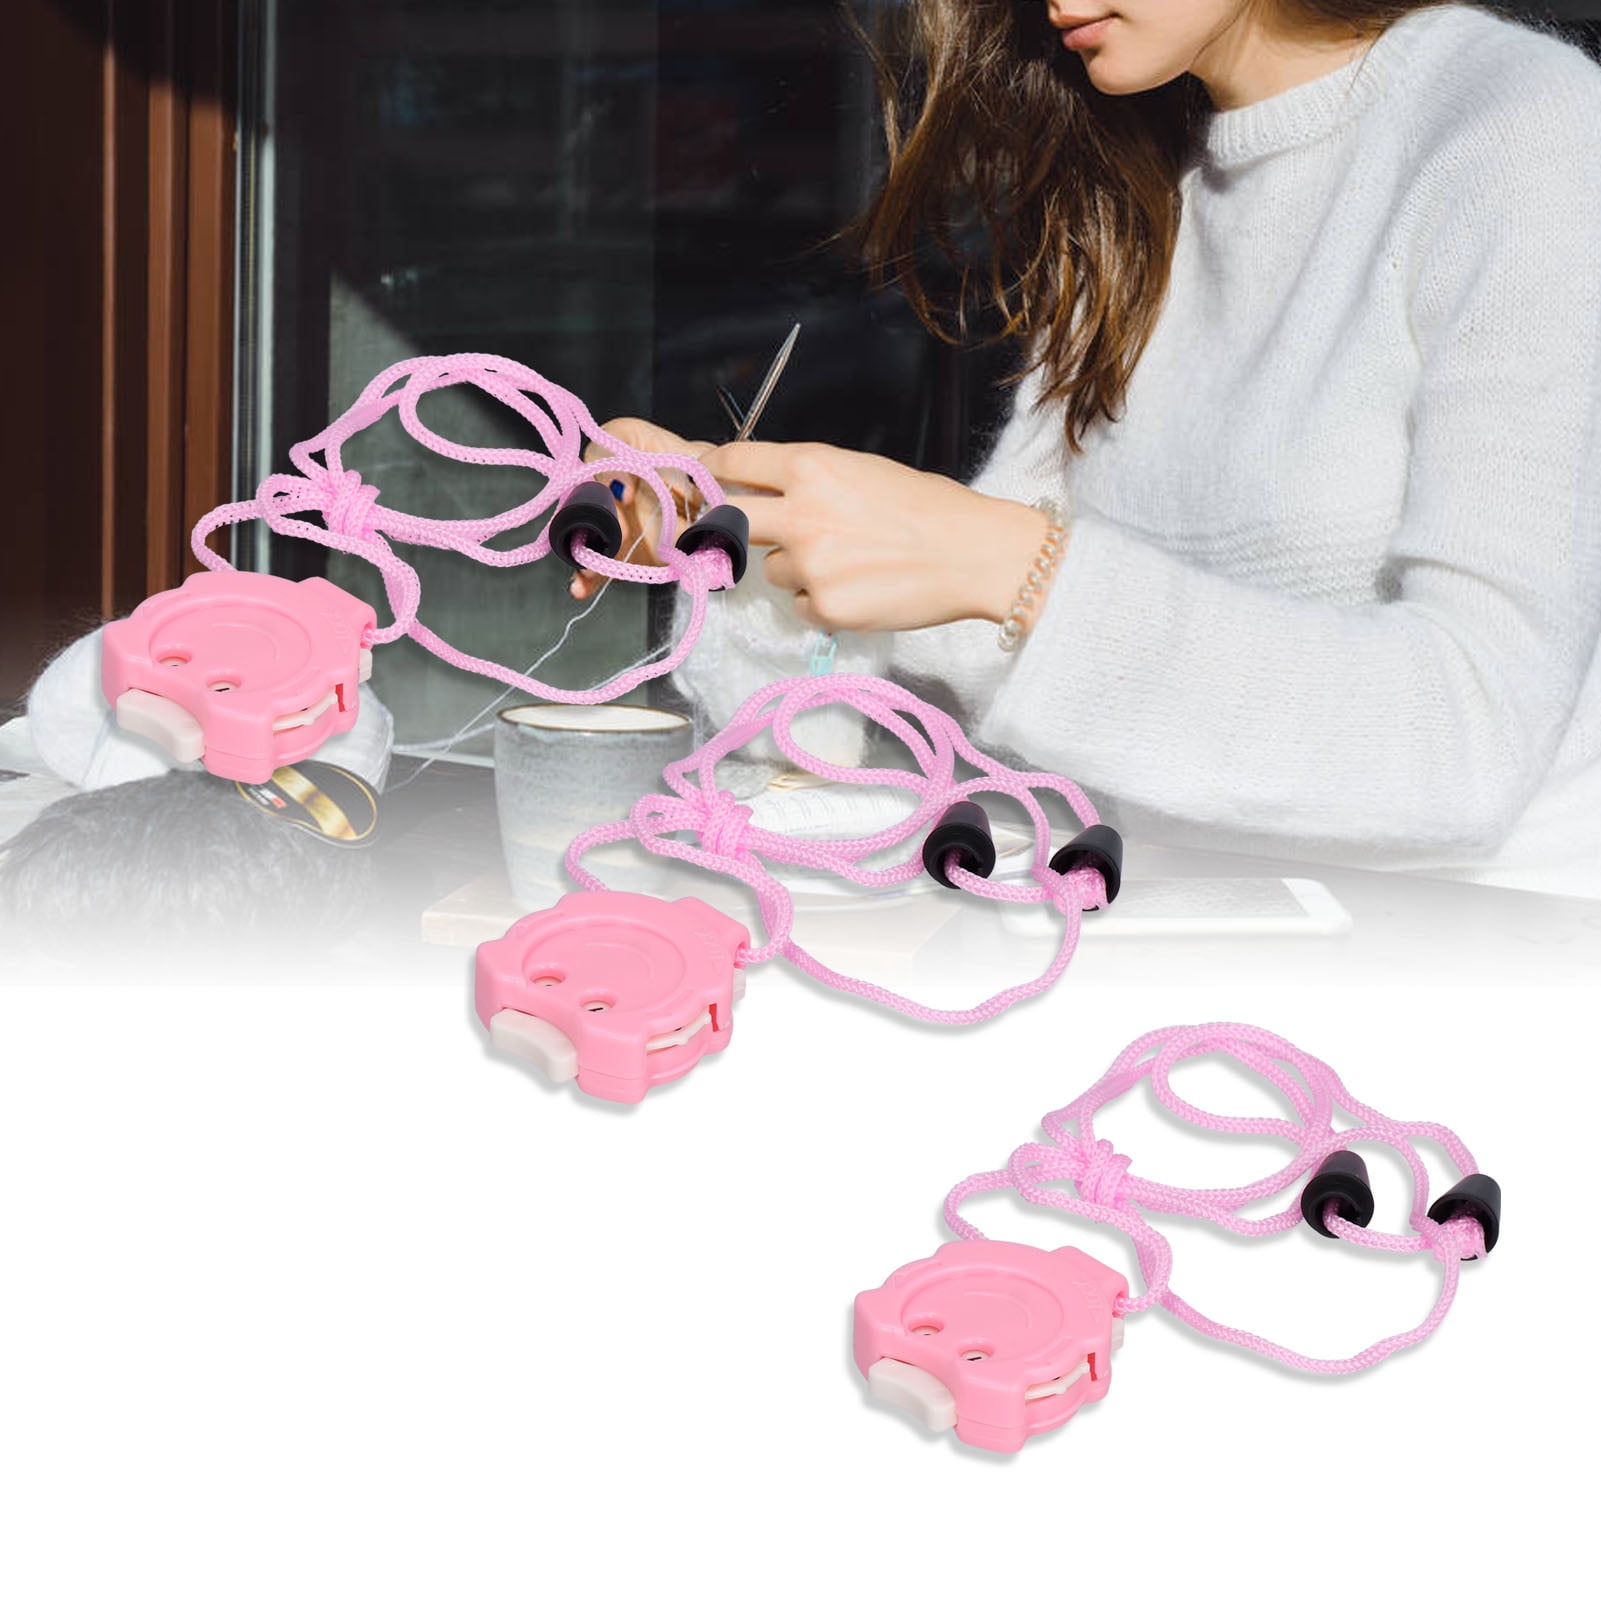 Crochet Row Counter Row Counter for Crochet Plastic 3Pcs Knitting Stitch  Counter Small Portable Improve Knitting Efficiency Cute Pink Stitch  Counters